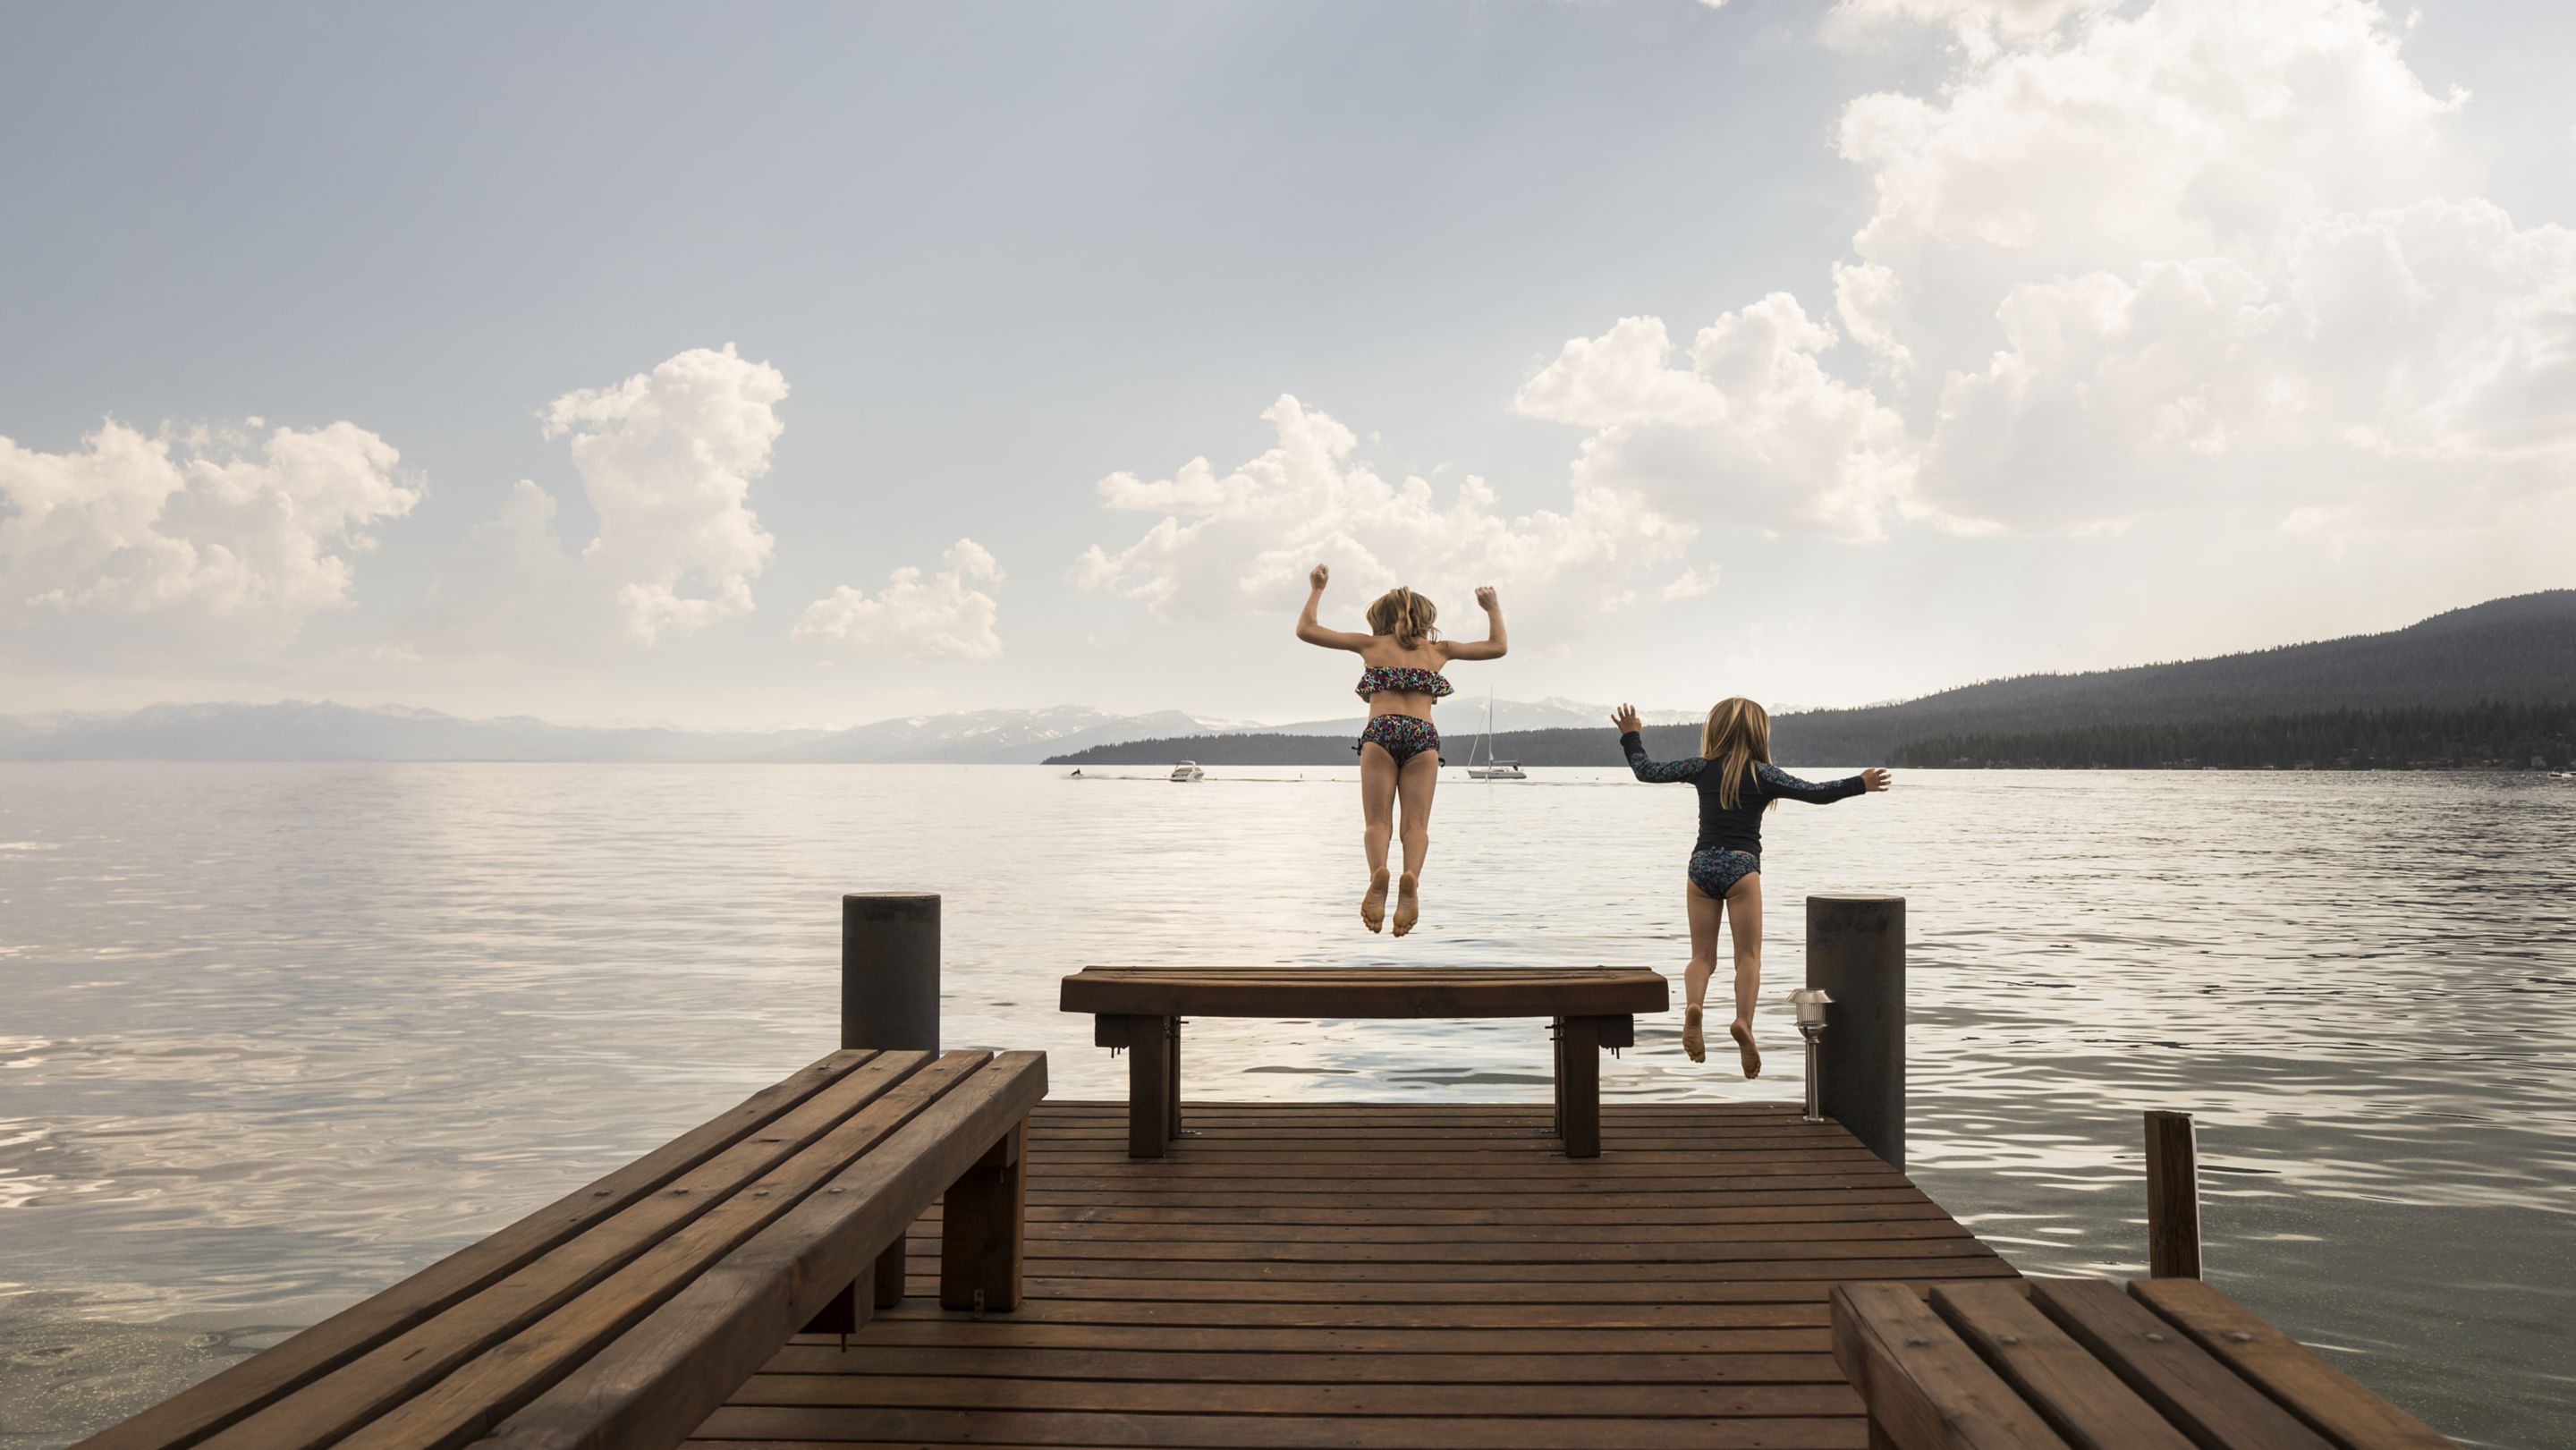 Two girls jump off a pier into a lake